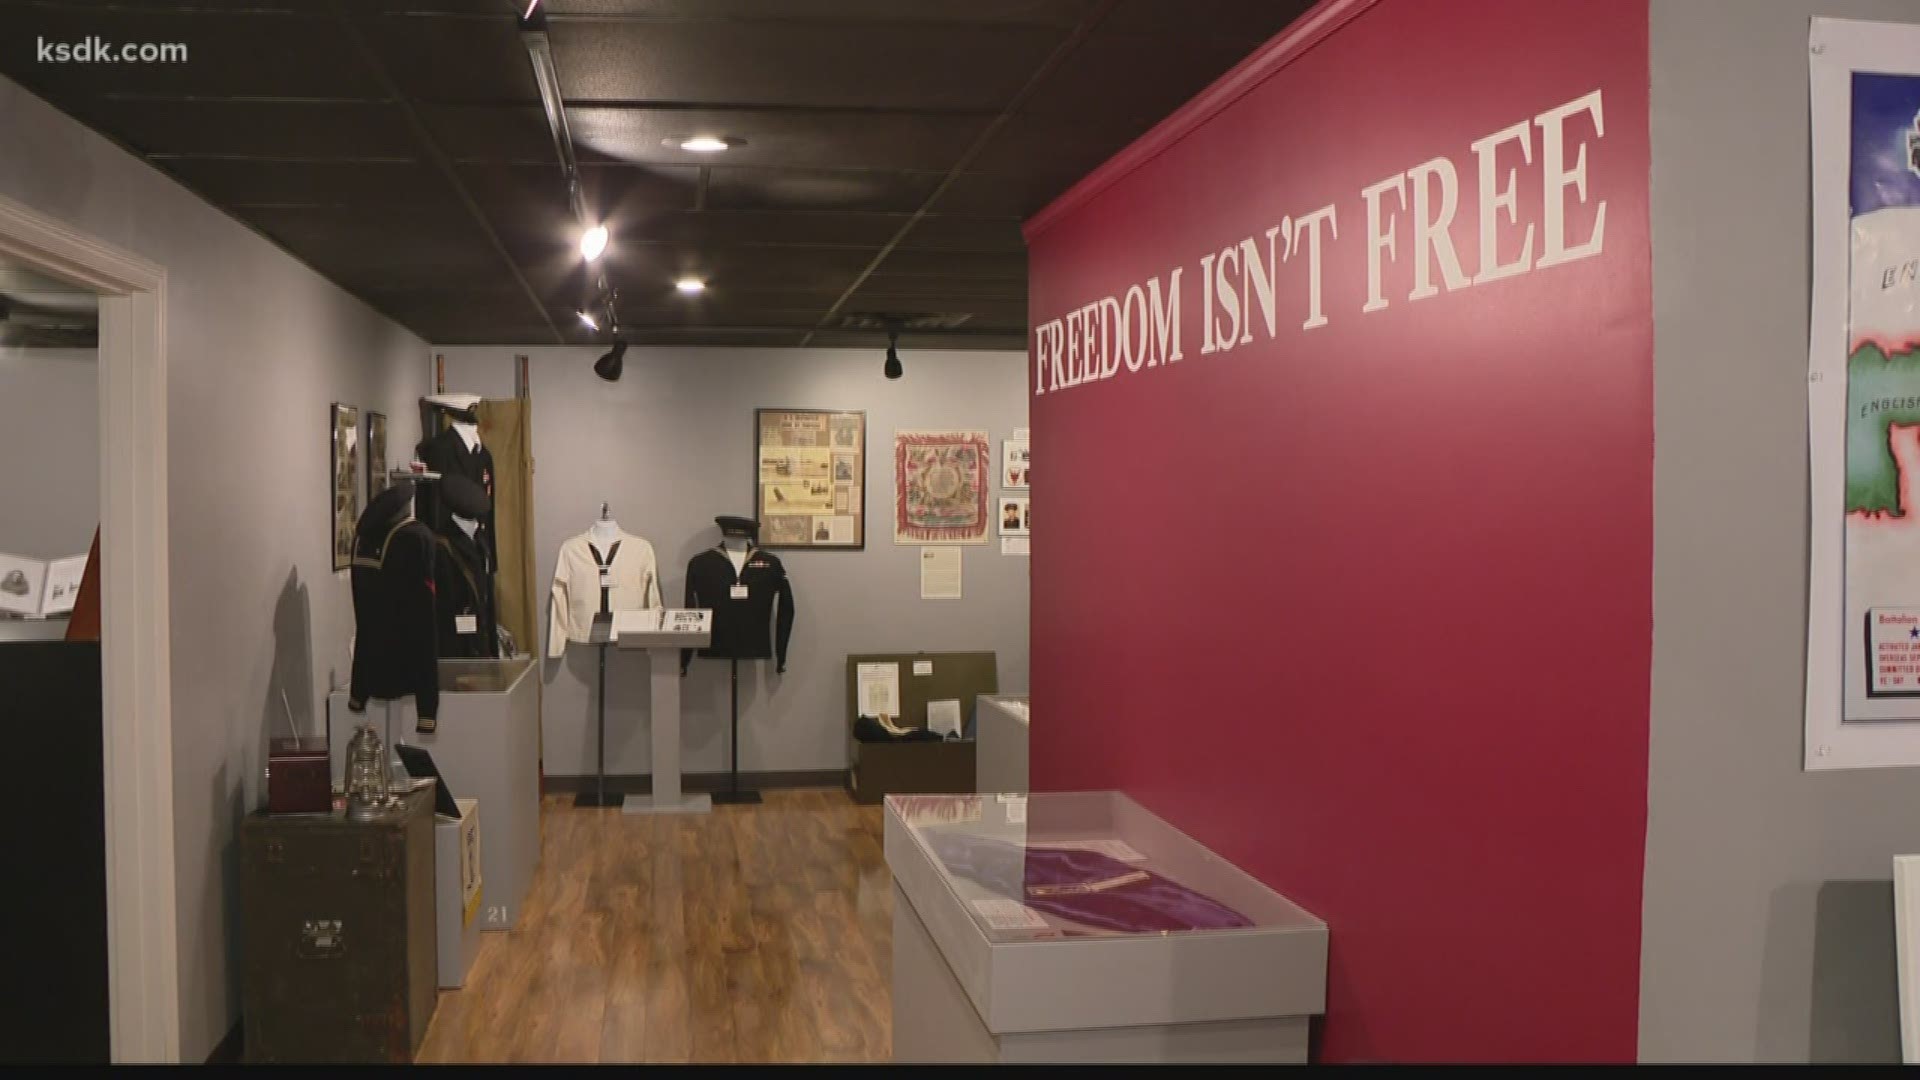 The volunteer group who runs the museum said donations are needed to keep the museum free to visit. They're trying to raise the money by Veterans Day.